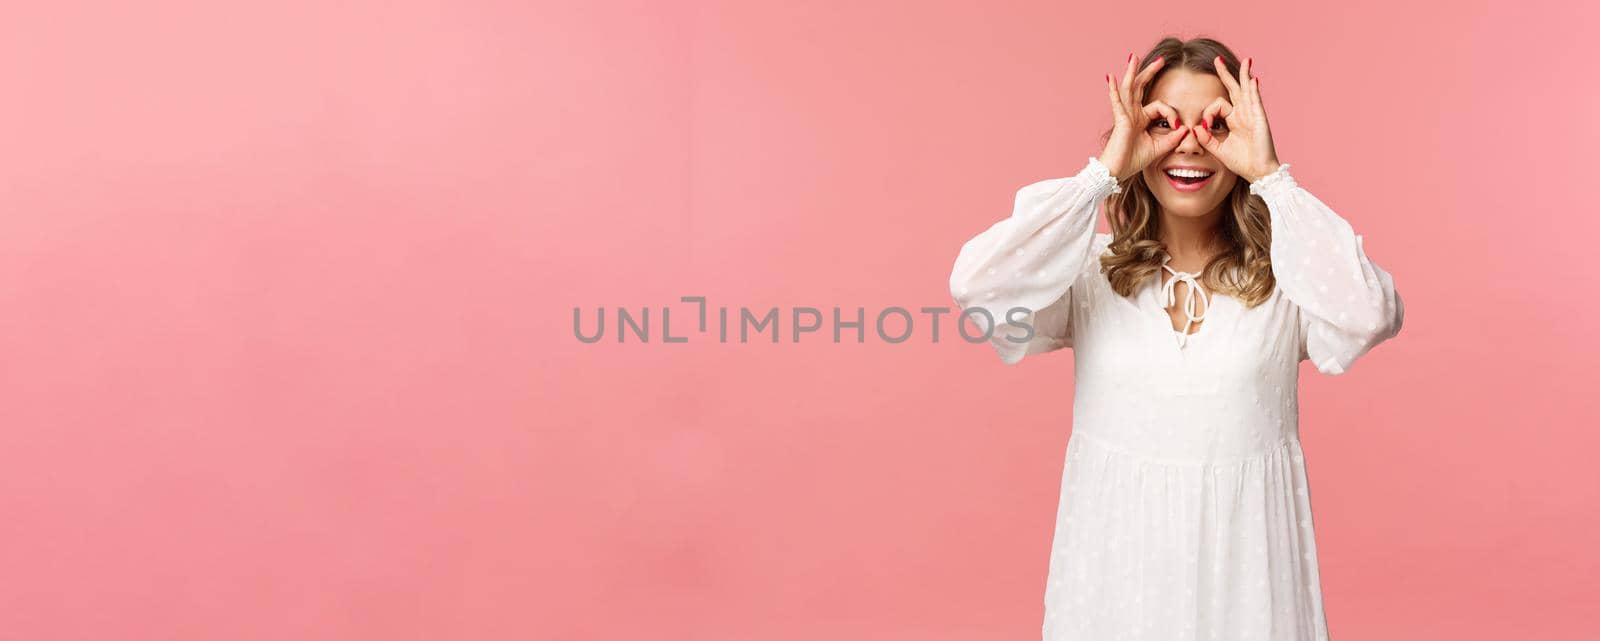 Portrait of dreamy cute and funny young blond girl seeing something interesting, looking from okay signs as making glass-mask with fingers over eyes, smiling amused, pink background.